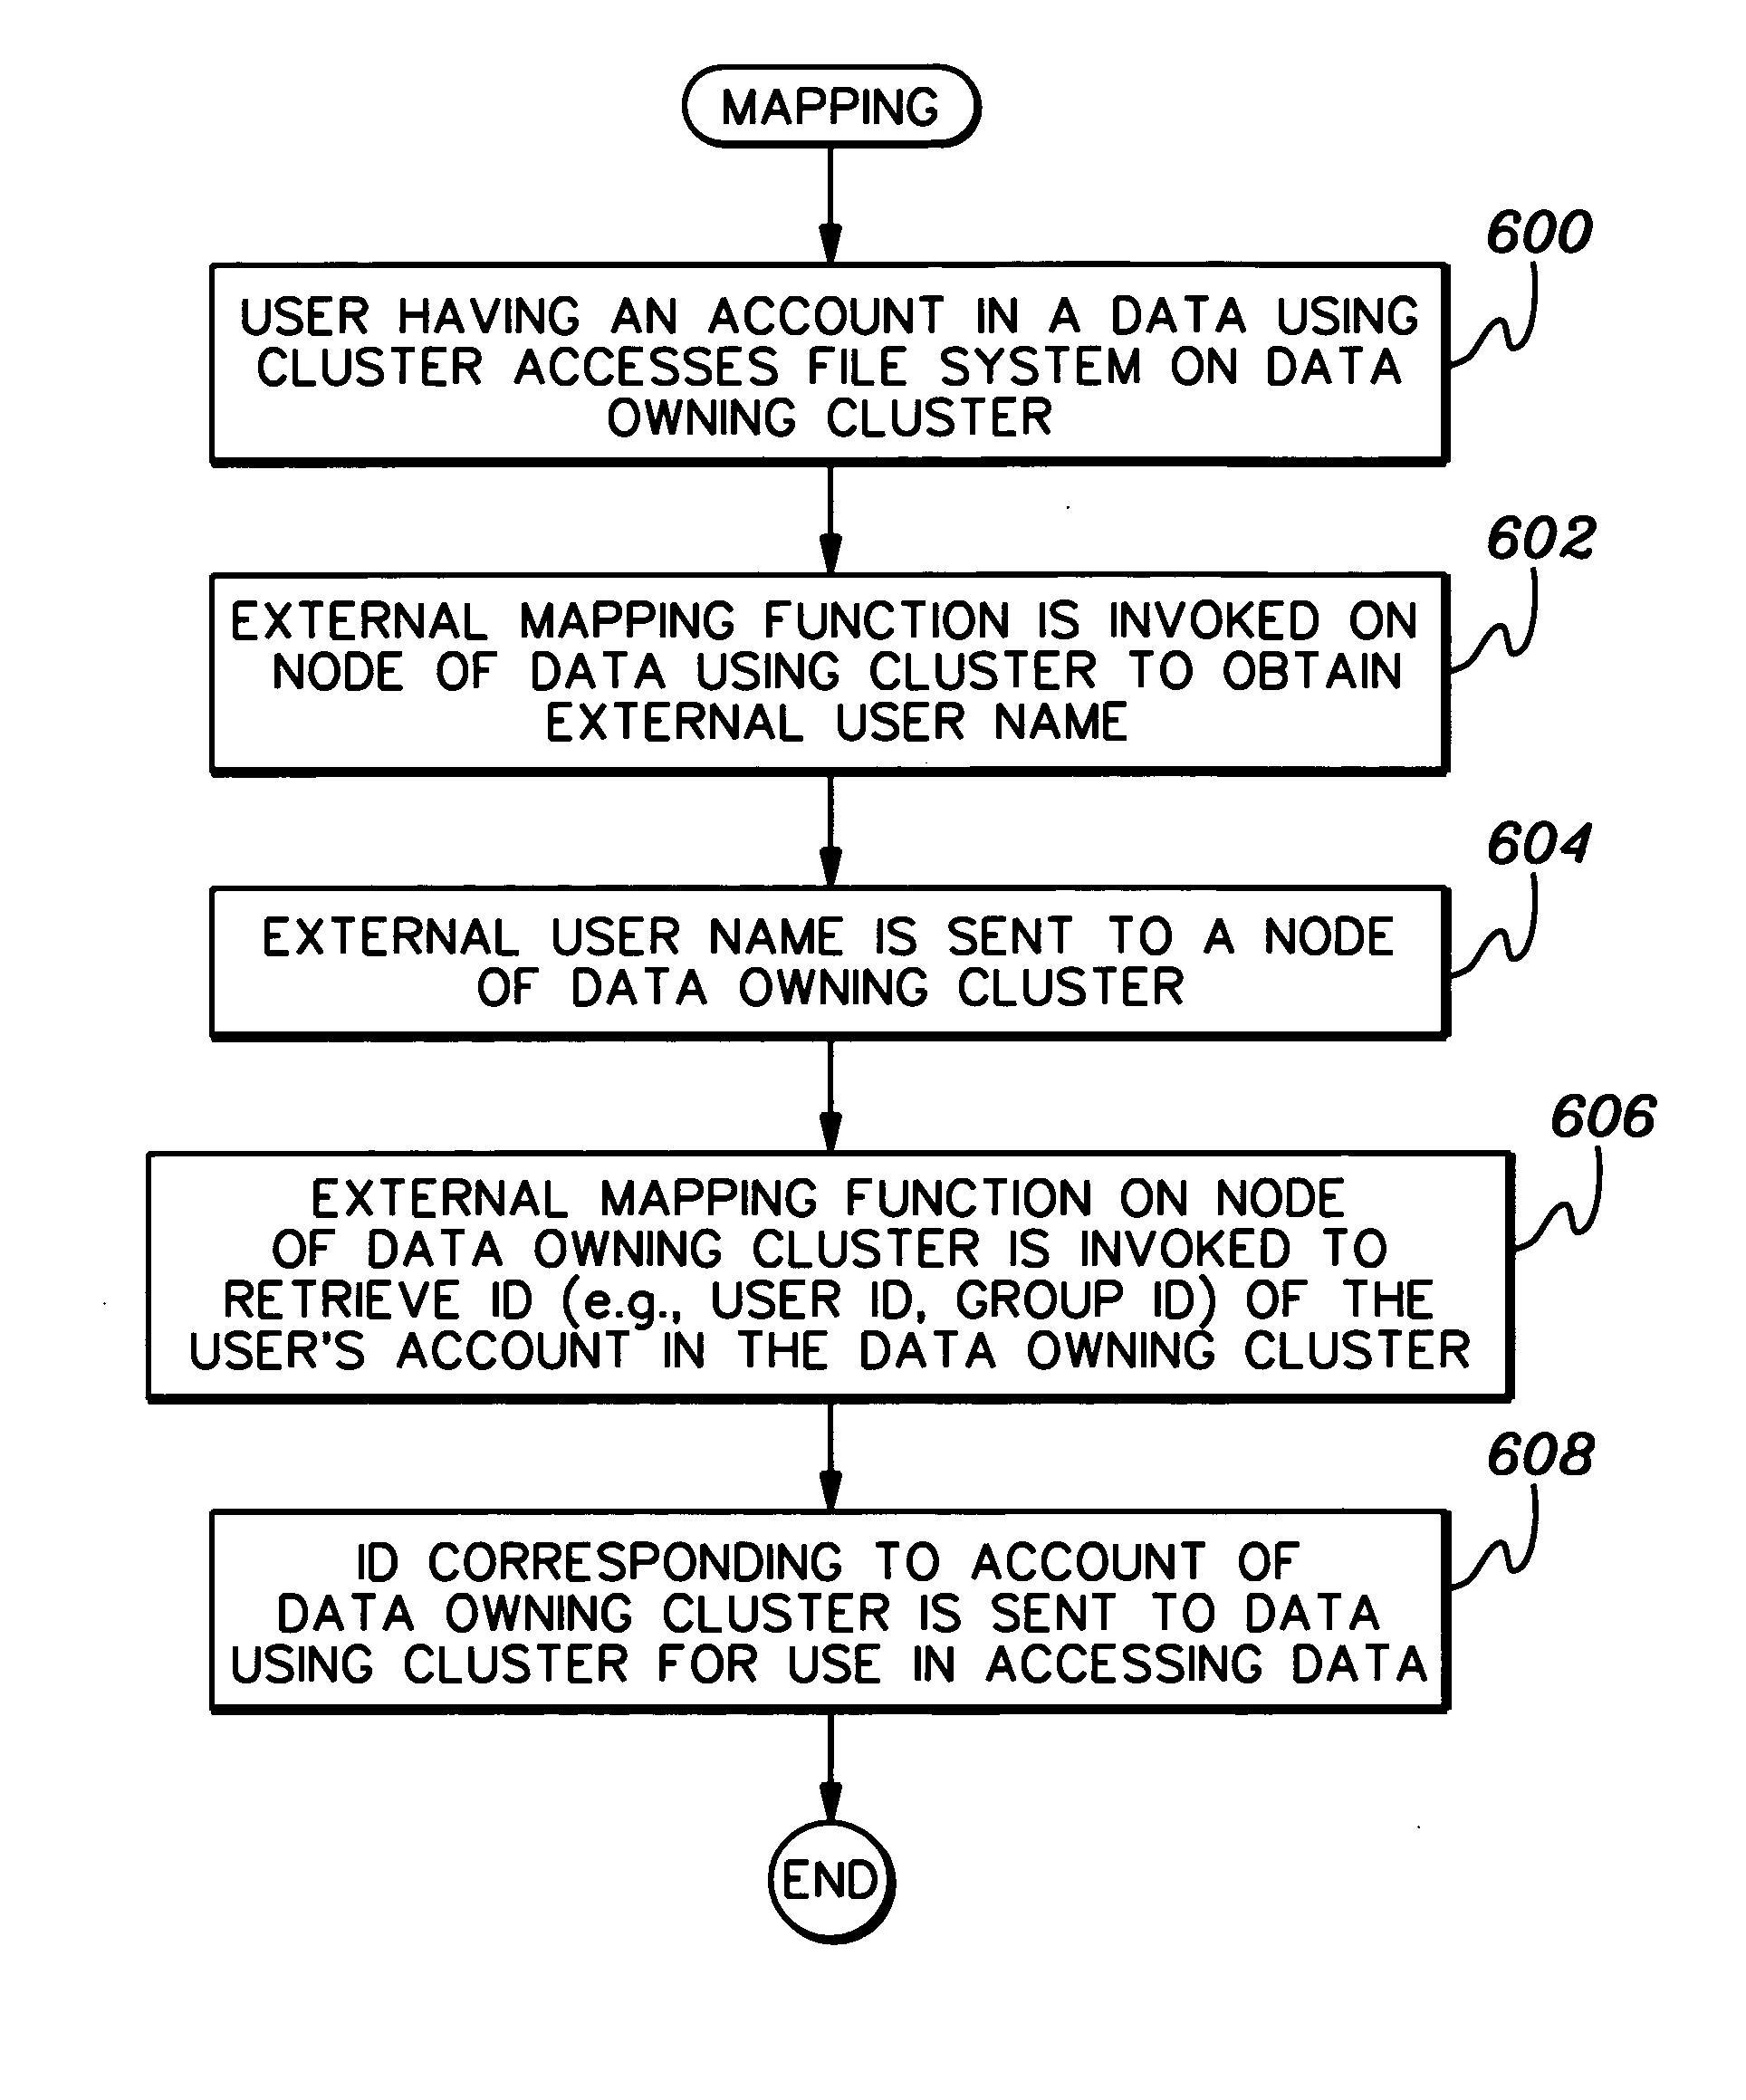 Employing an identifier for an account of one domain in another domain to facilitate access of data on shared storage media